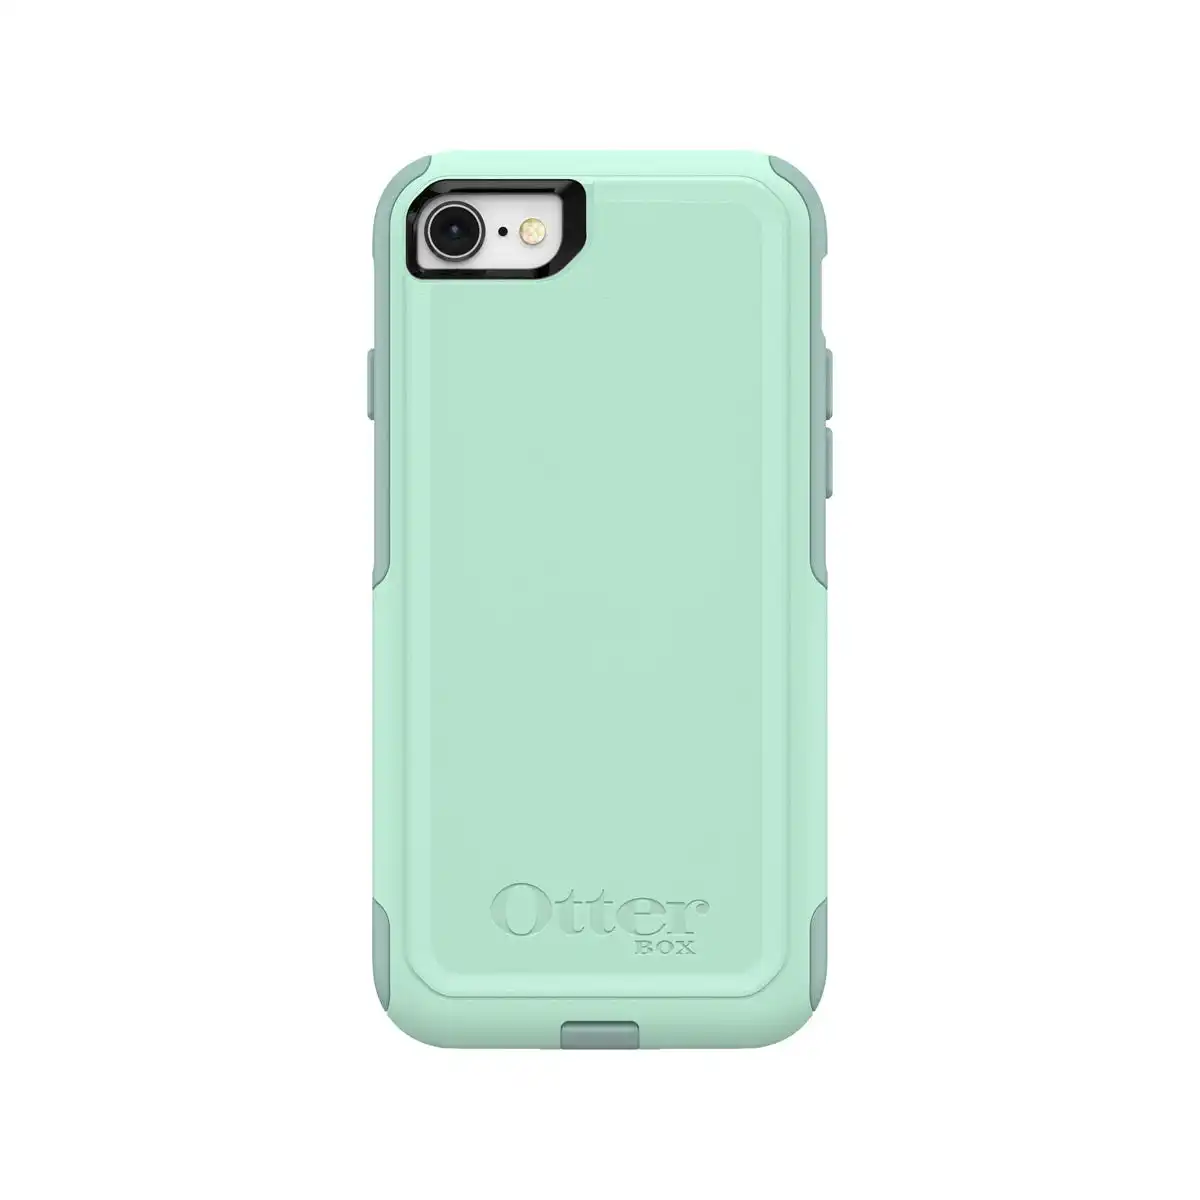 Otterbox Commuter Phone Case for iPhone 7/8 - Ocean Way